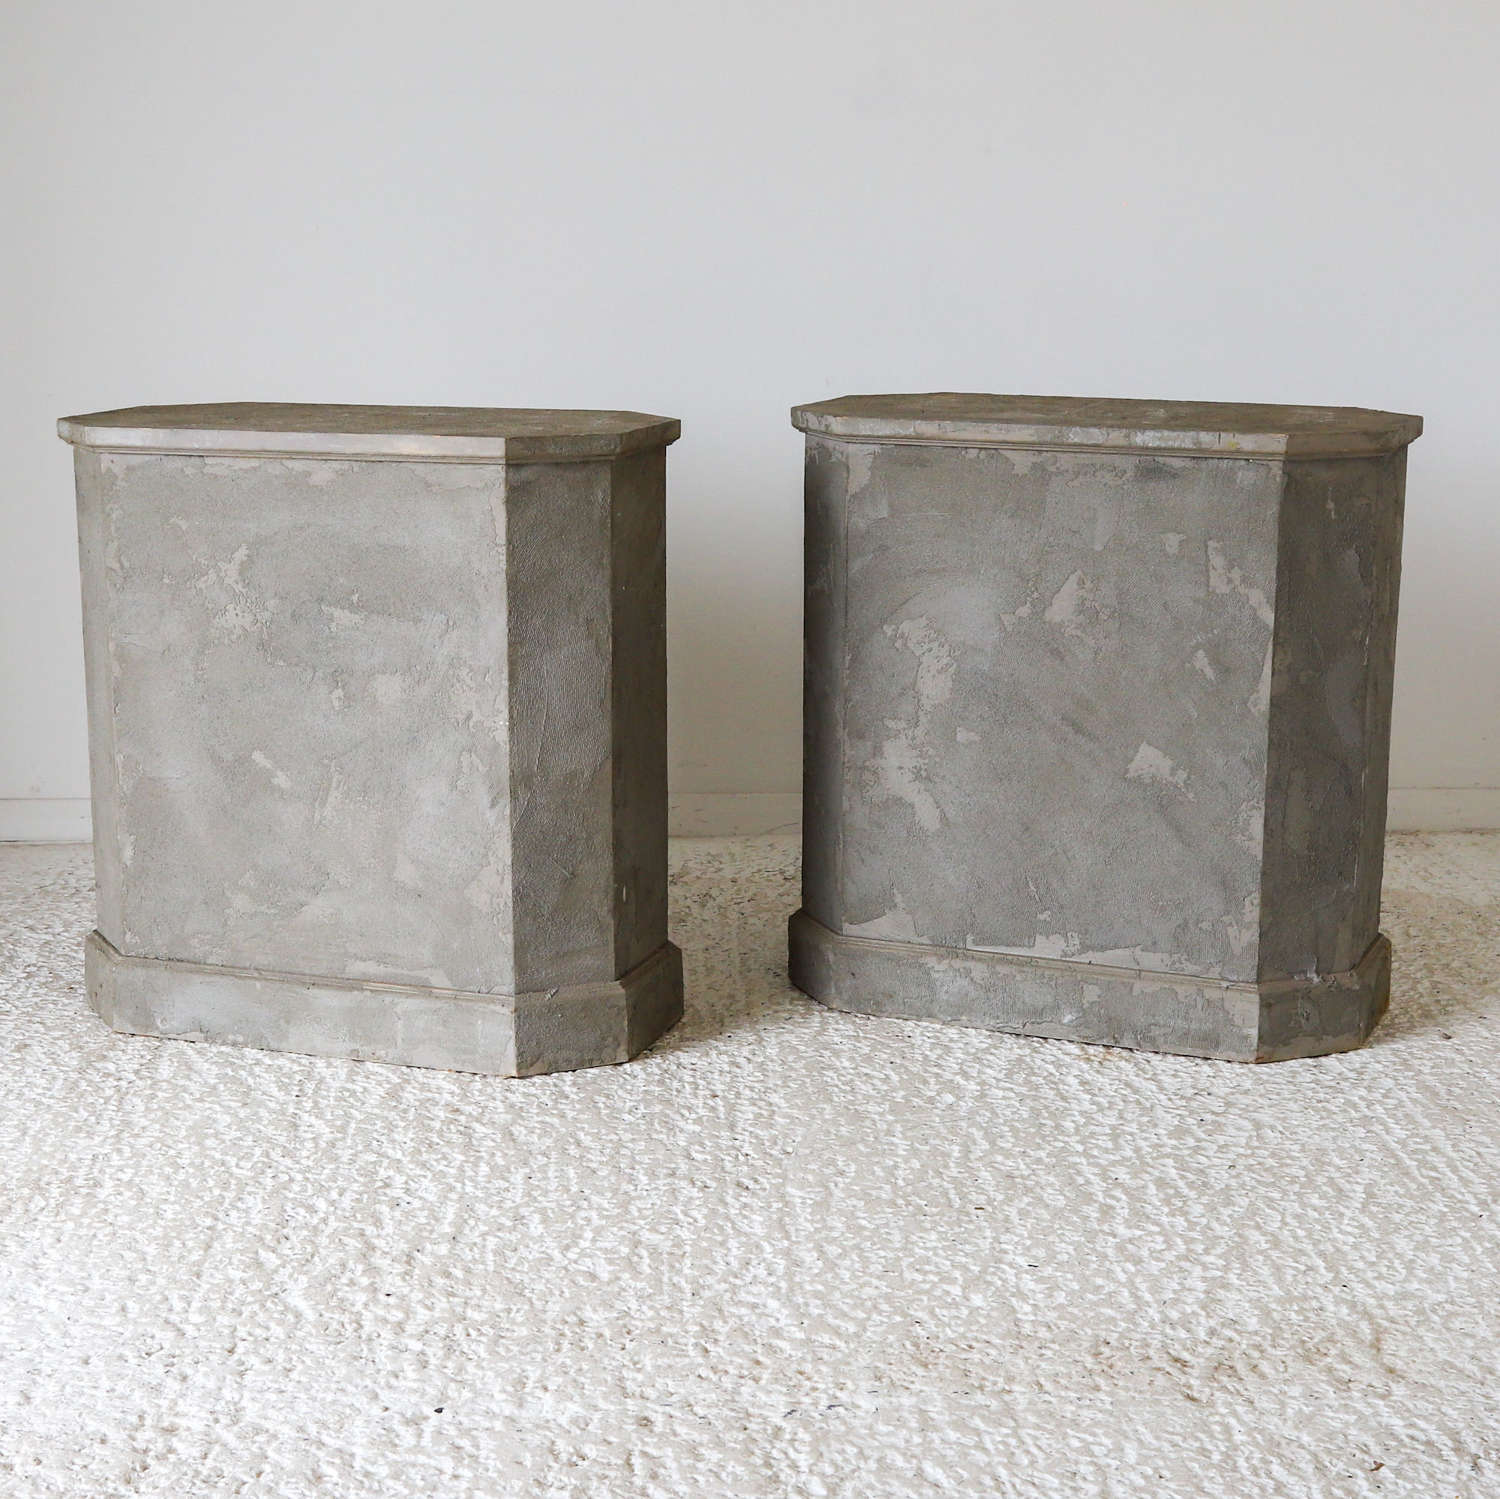 Pair of Contemporary Stands in Wood painted to resemble stone